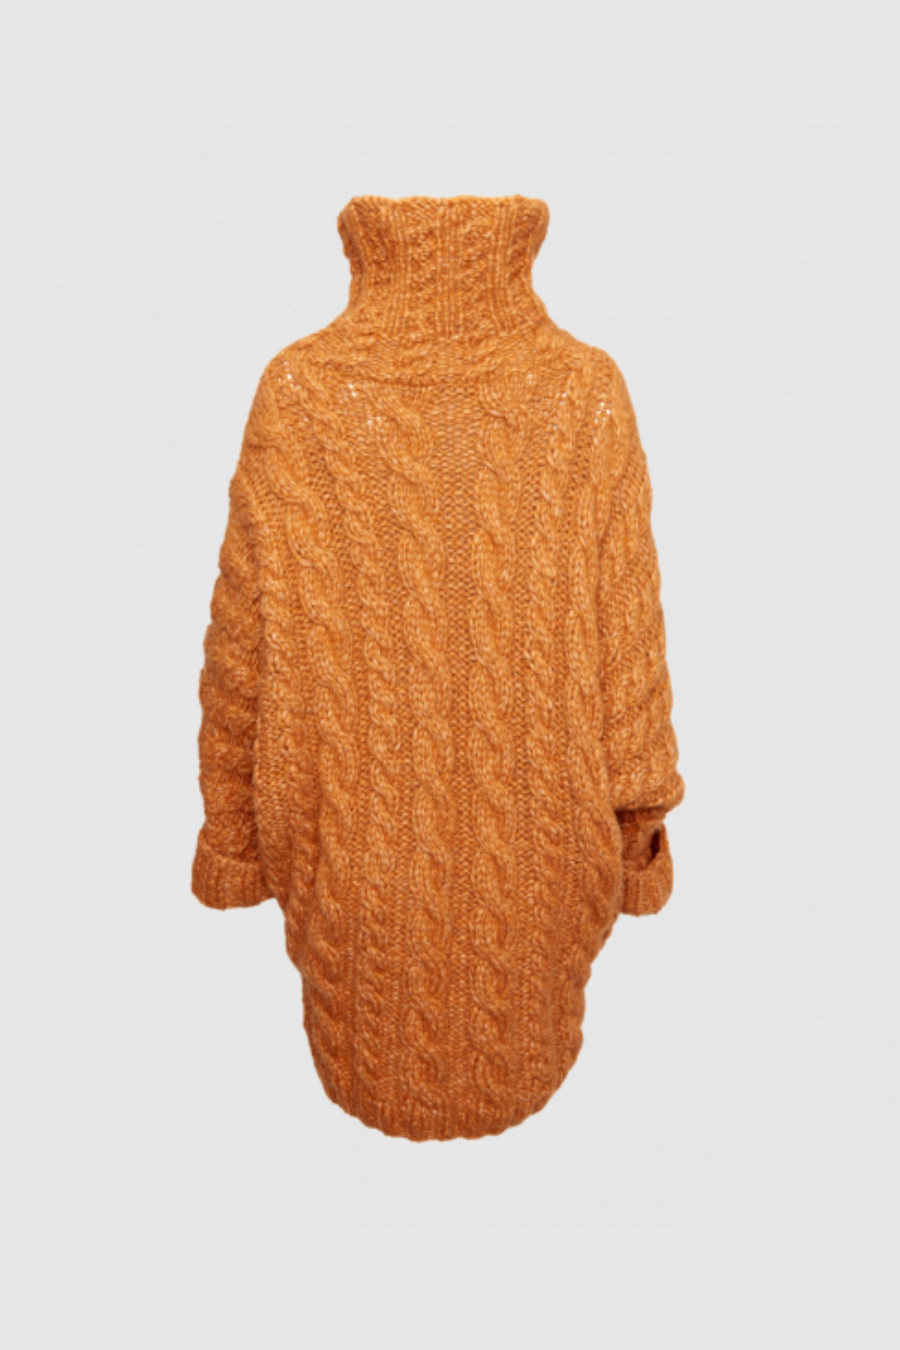 Oversized knit sweater in Apricot